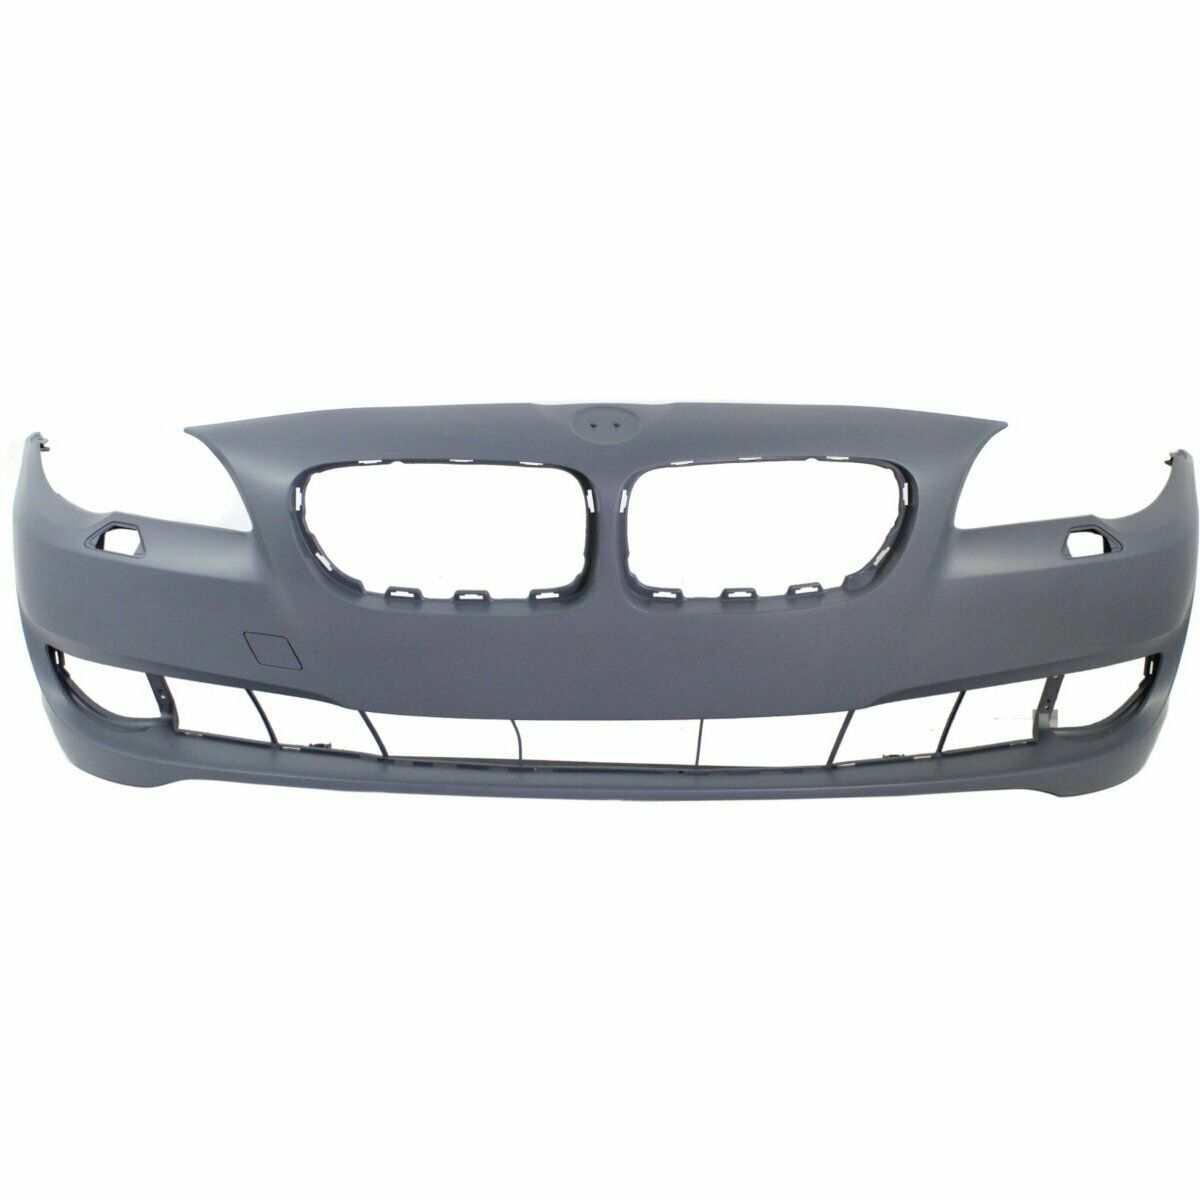 2011-2013 BMW 5 SERIES Front Bumper No Sensors Painted to Match